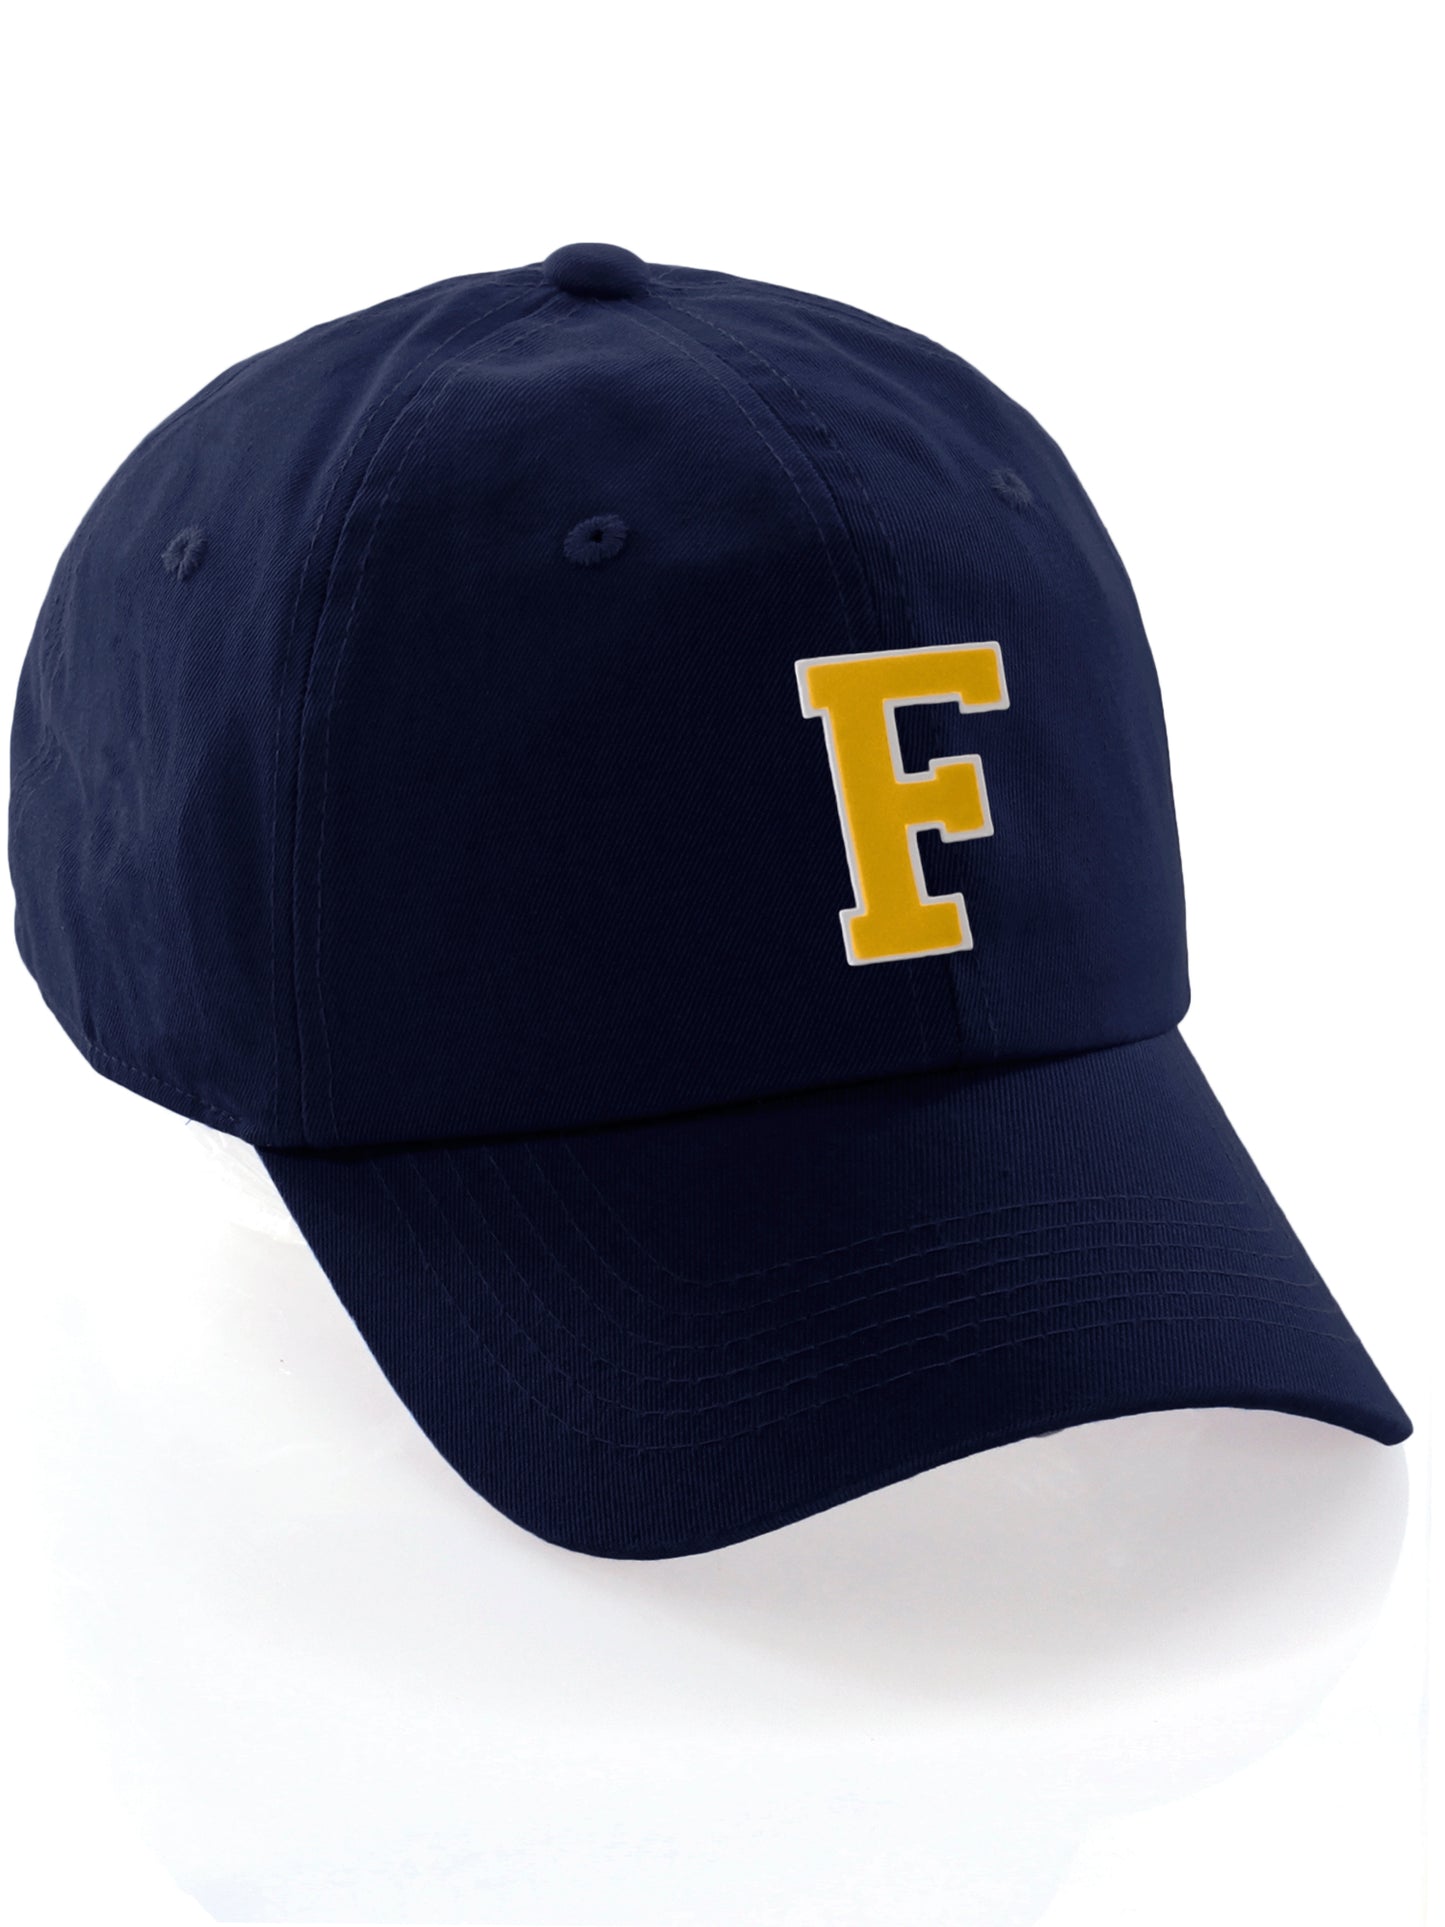 I&W Hatgear Customized Letter Initial Baseball Hat A to Z Team Colors, Navy Cap White Gold